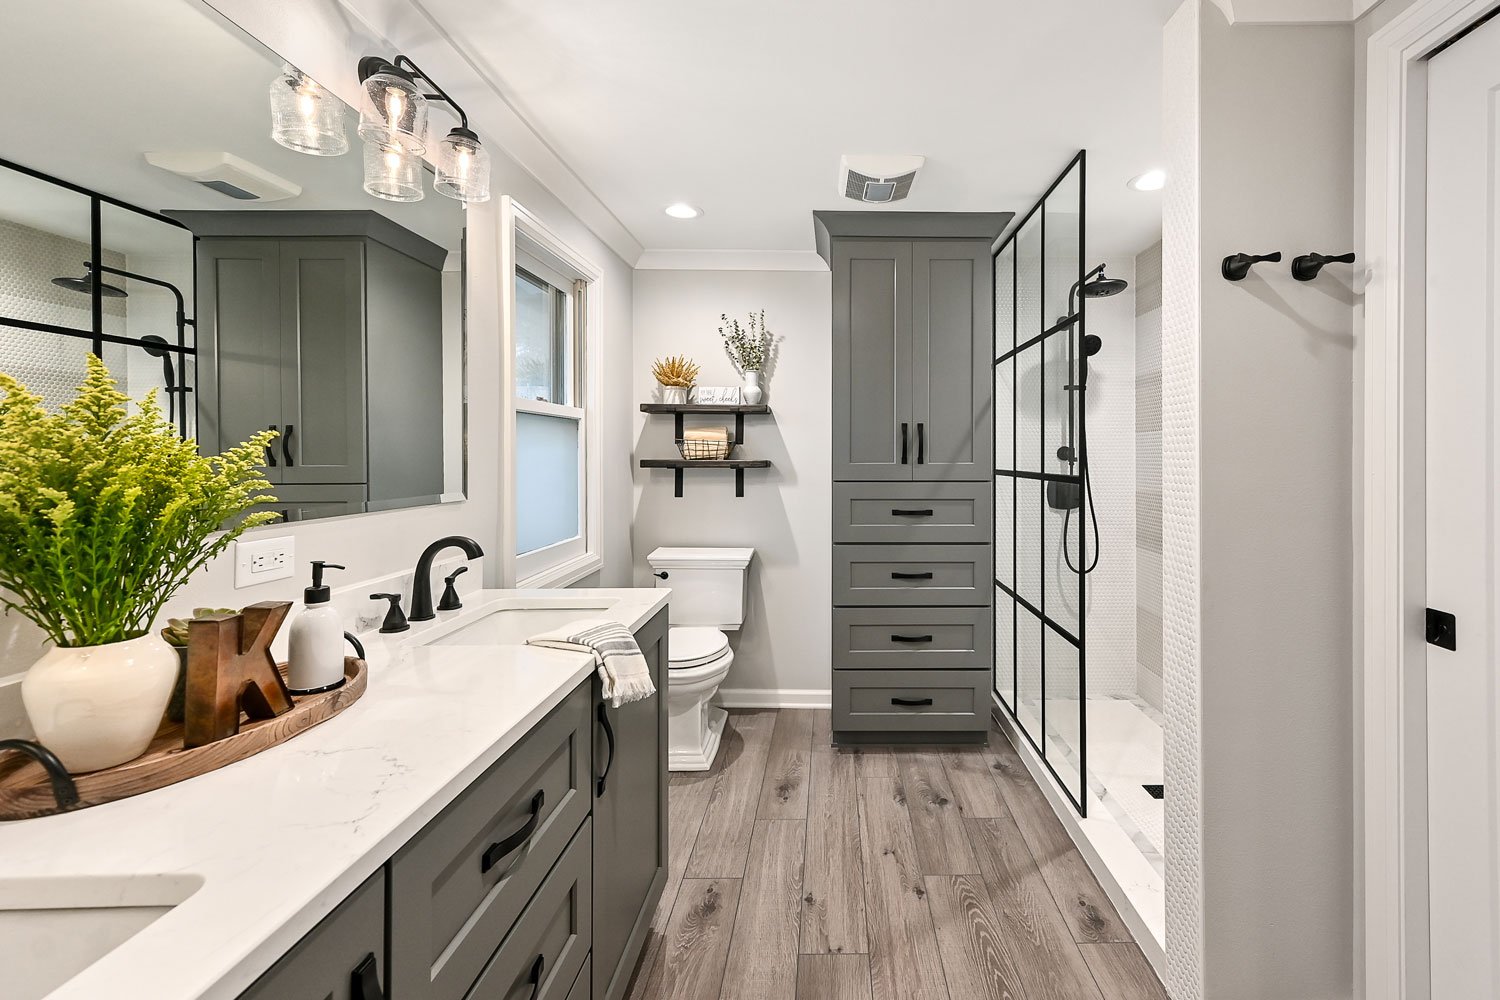 Bathroom Remodel Transforming Your Space With Style and Functionality